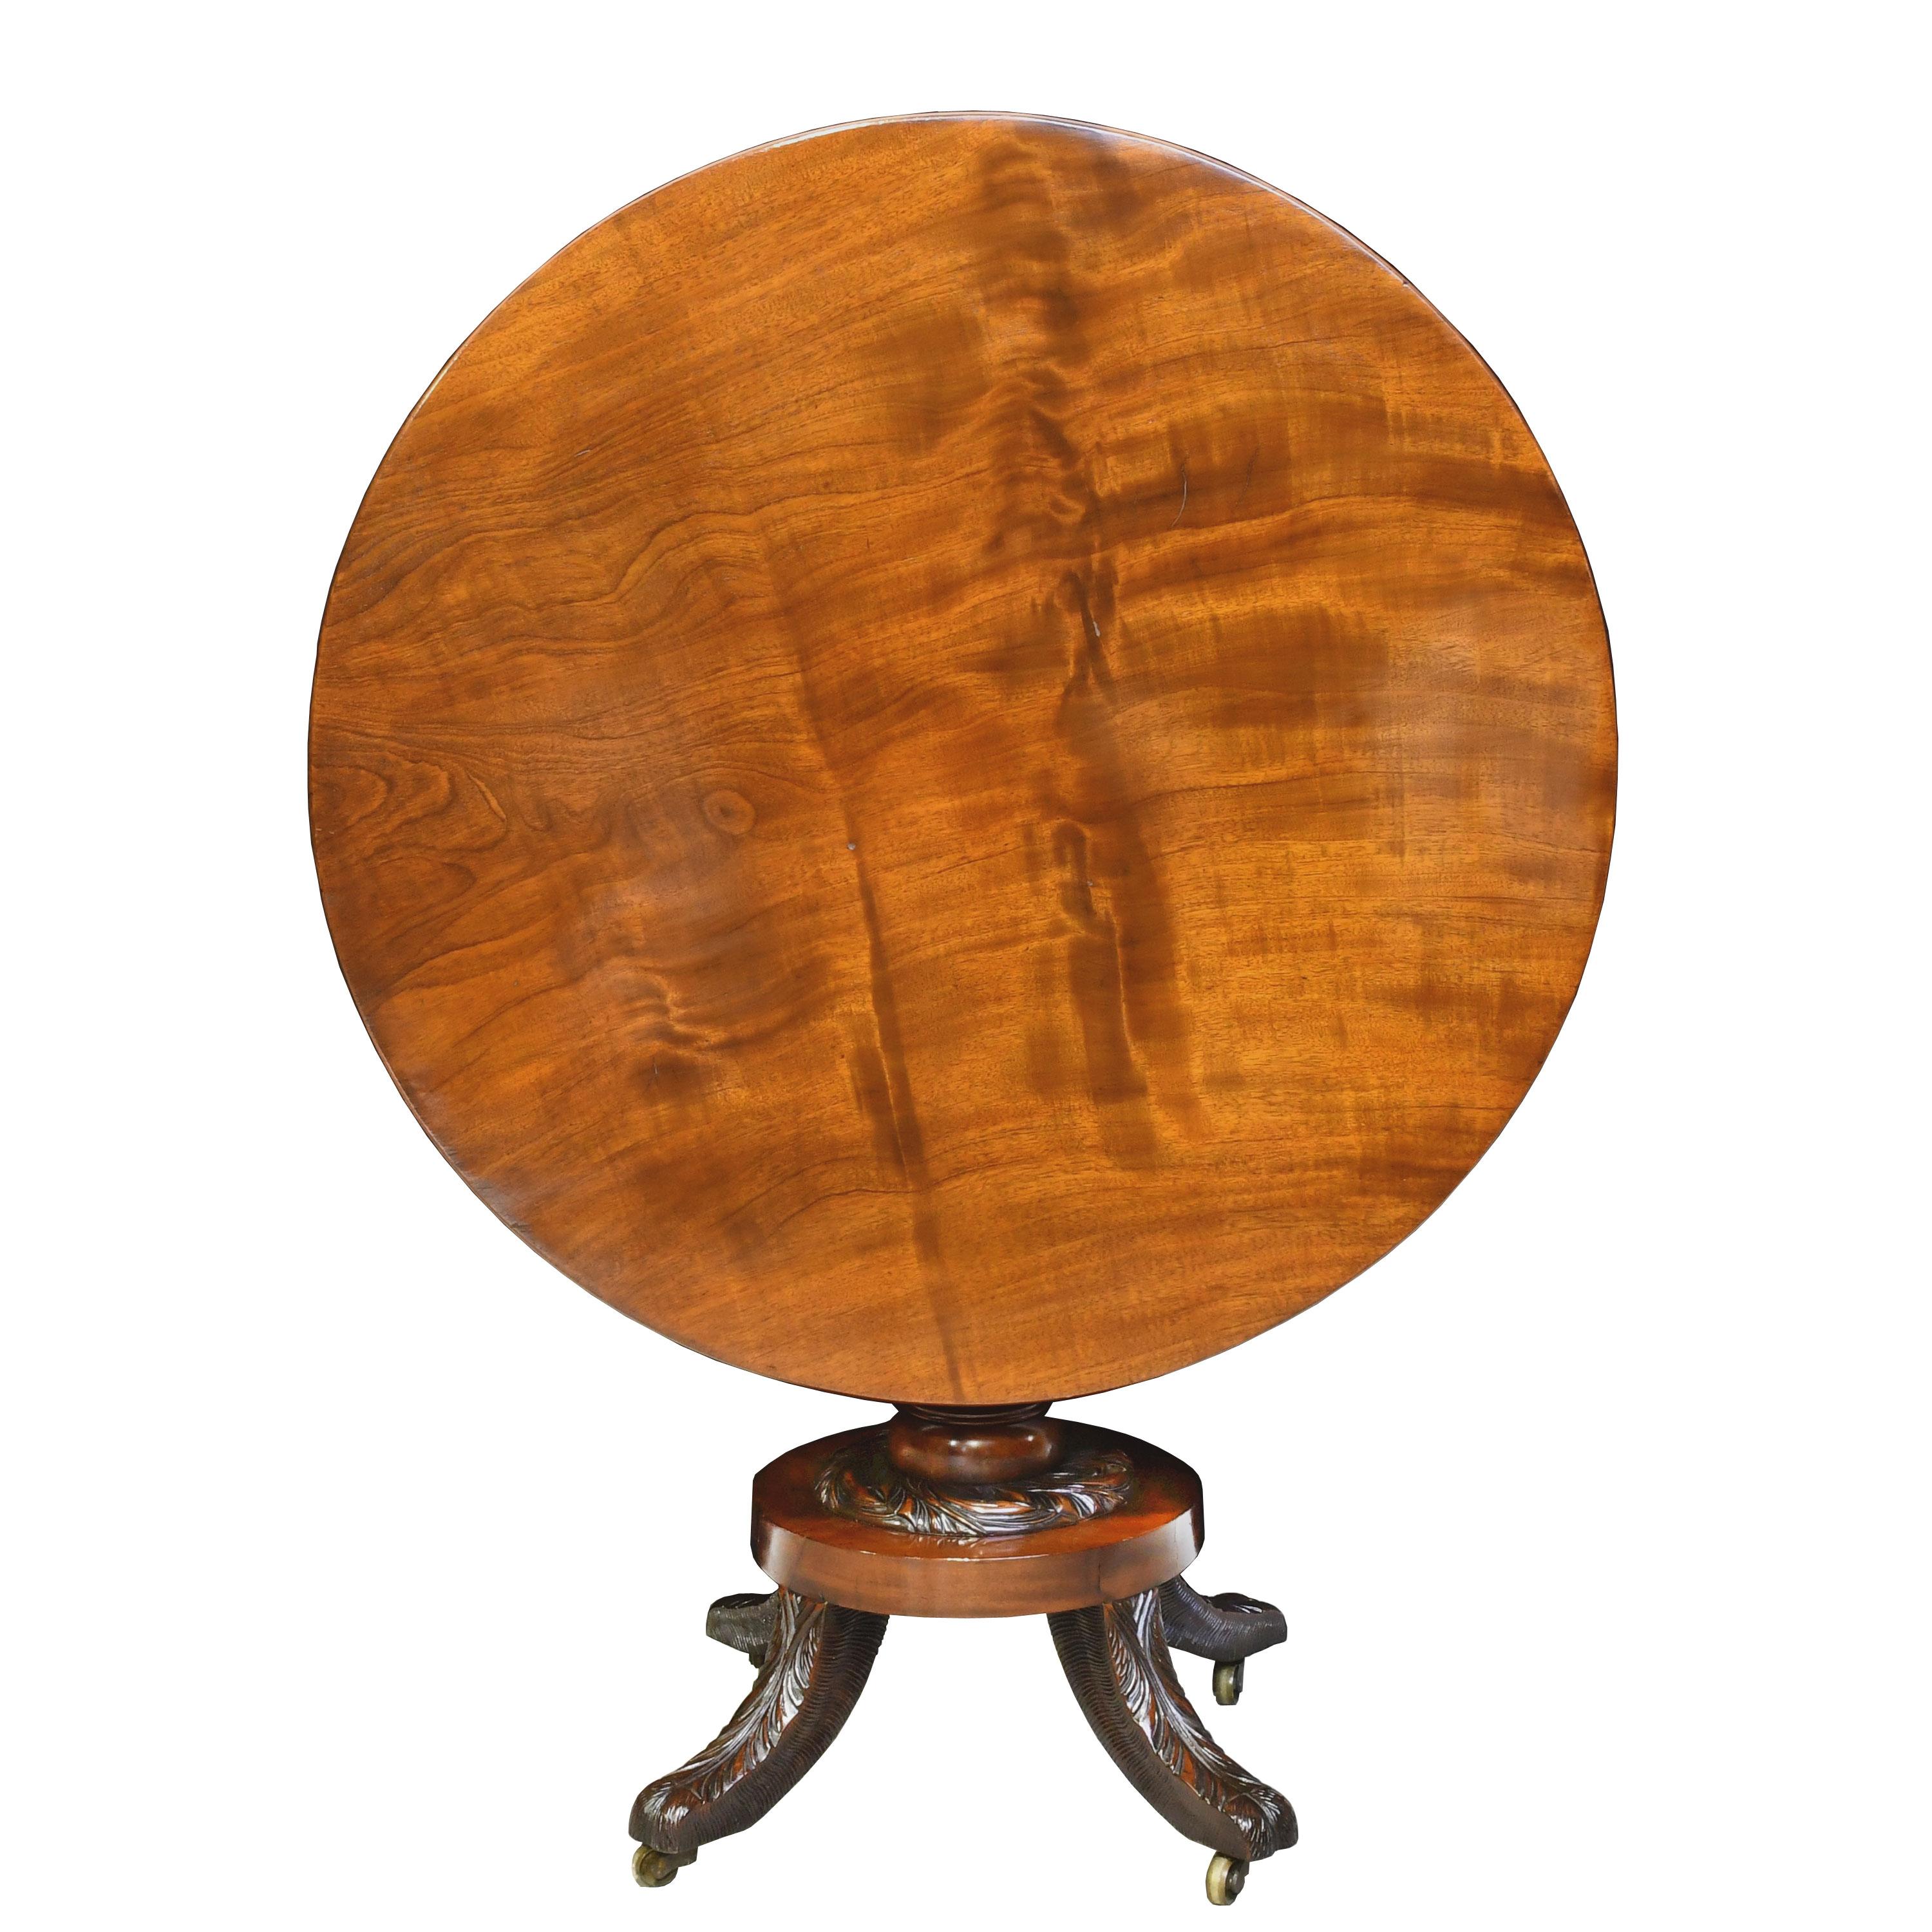 A very handsome round table in the neoclassical style made of fine West Indies mahogany. New York, circa 1820. This Federal table is beautifully-crafted, with well-articulated carvings of tabacco leaves along the center column and on the splayed